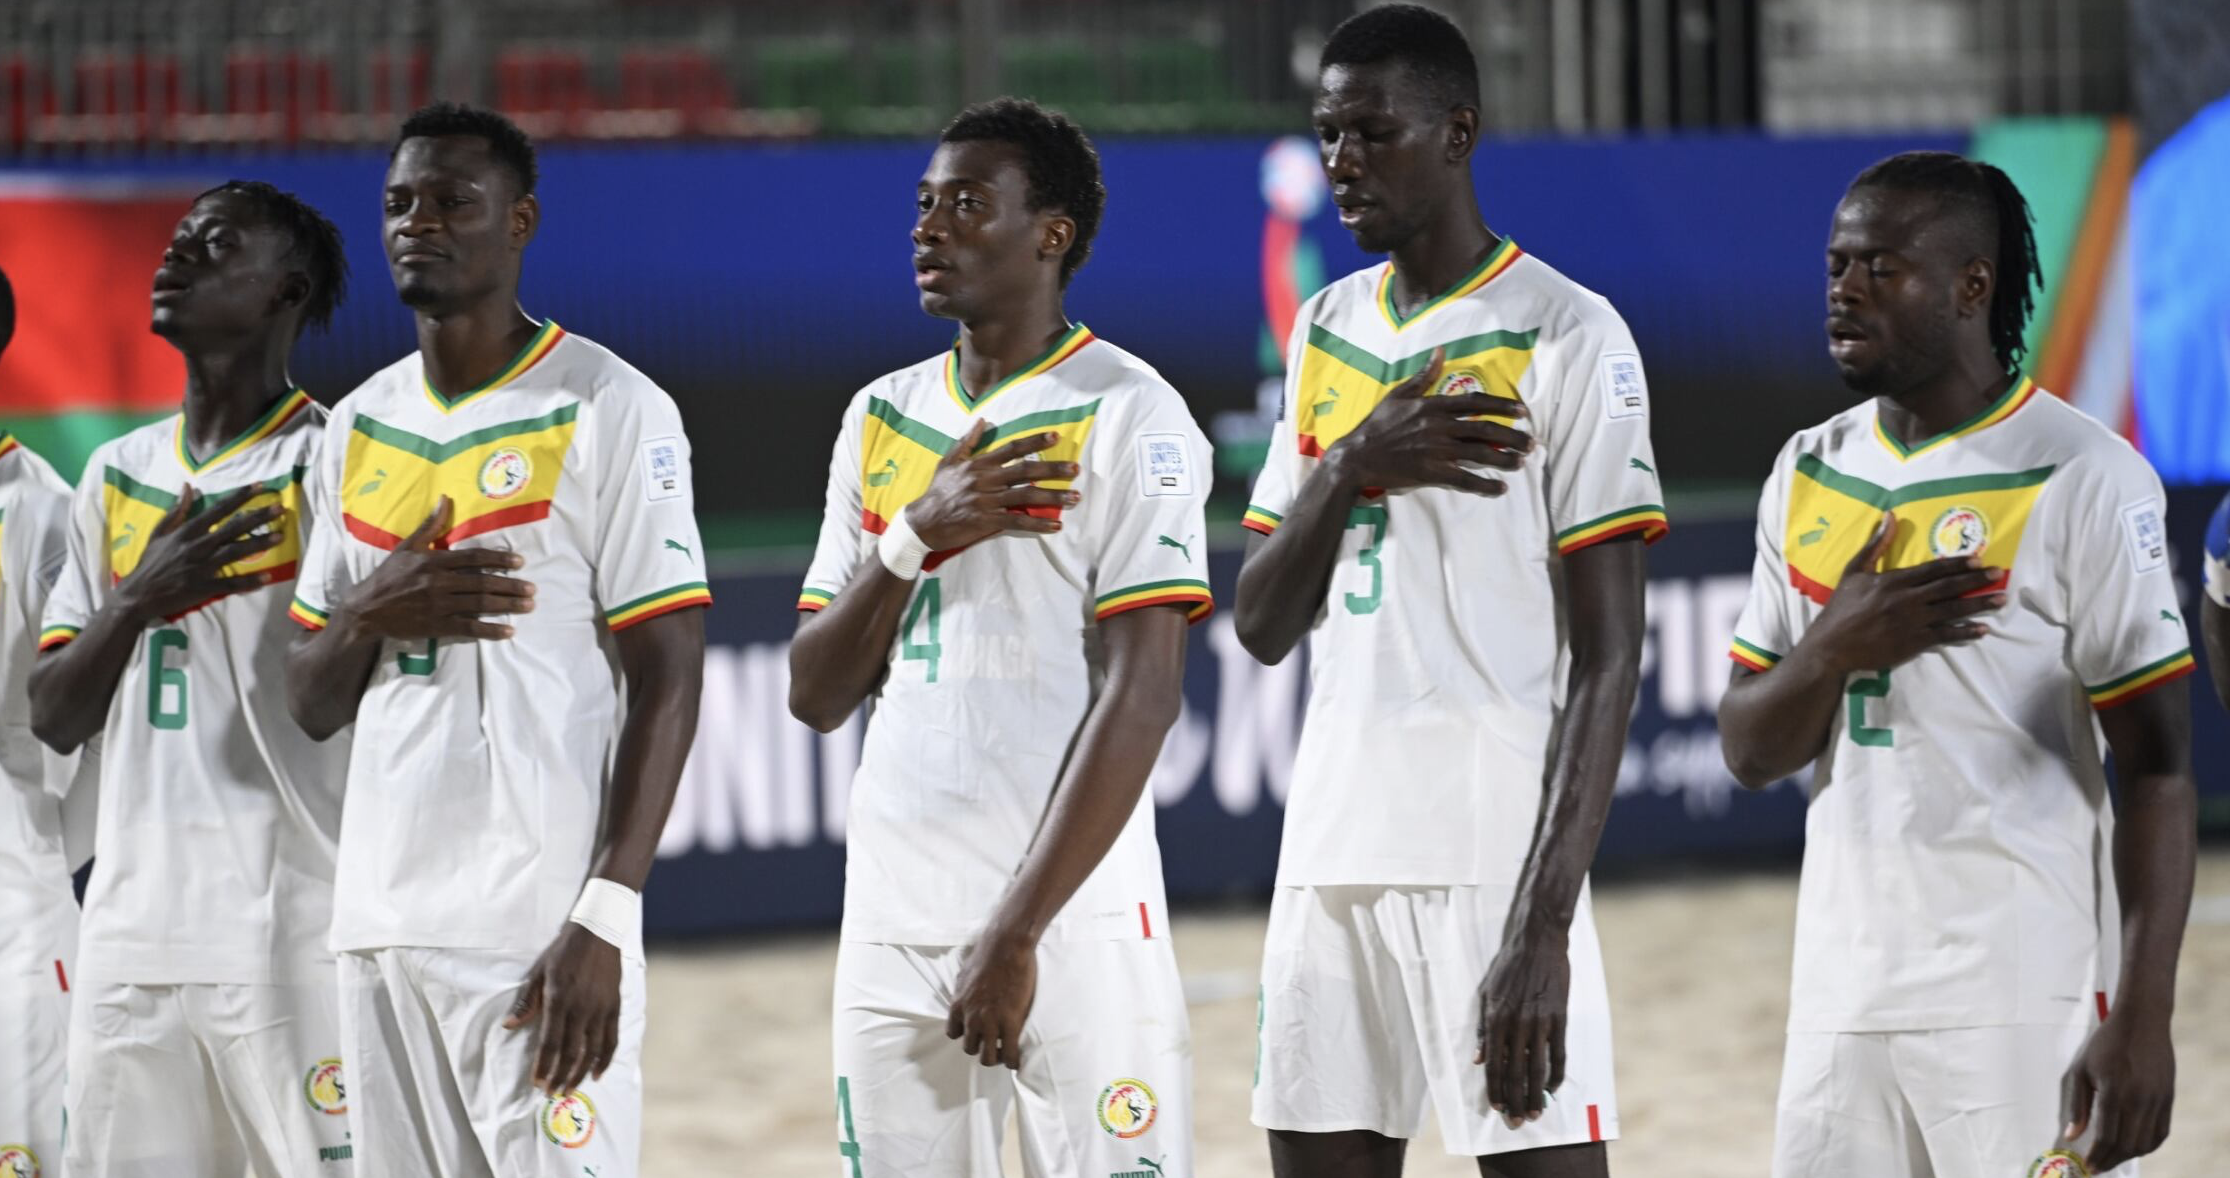 Beach Soccer is a beacon of hope in Mozambique – Saidate Abudo Moveia